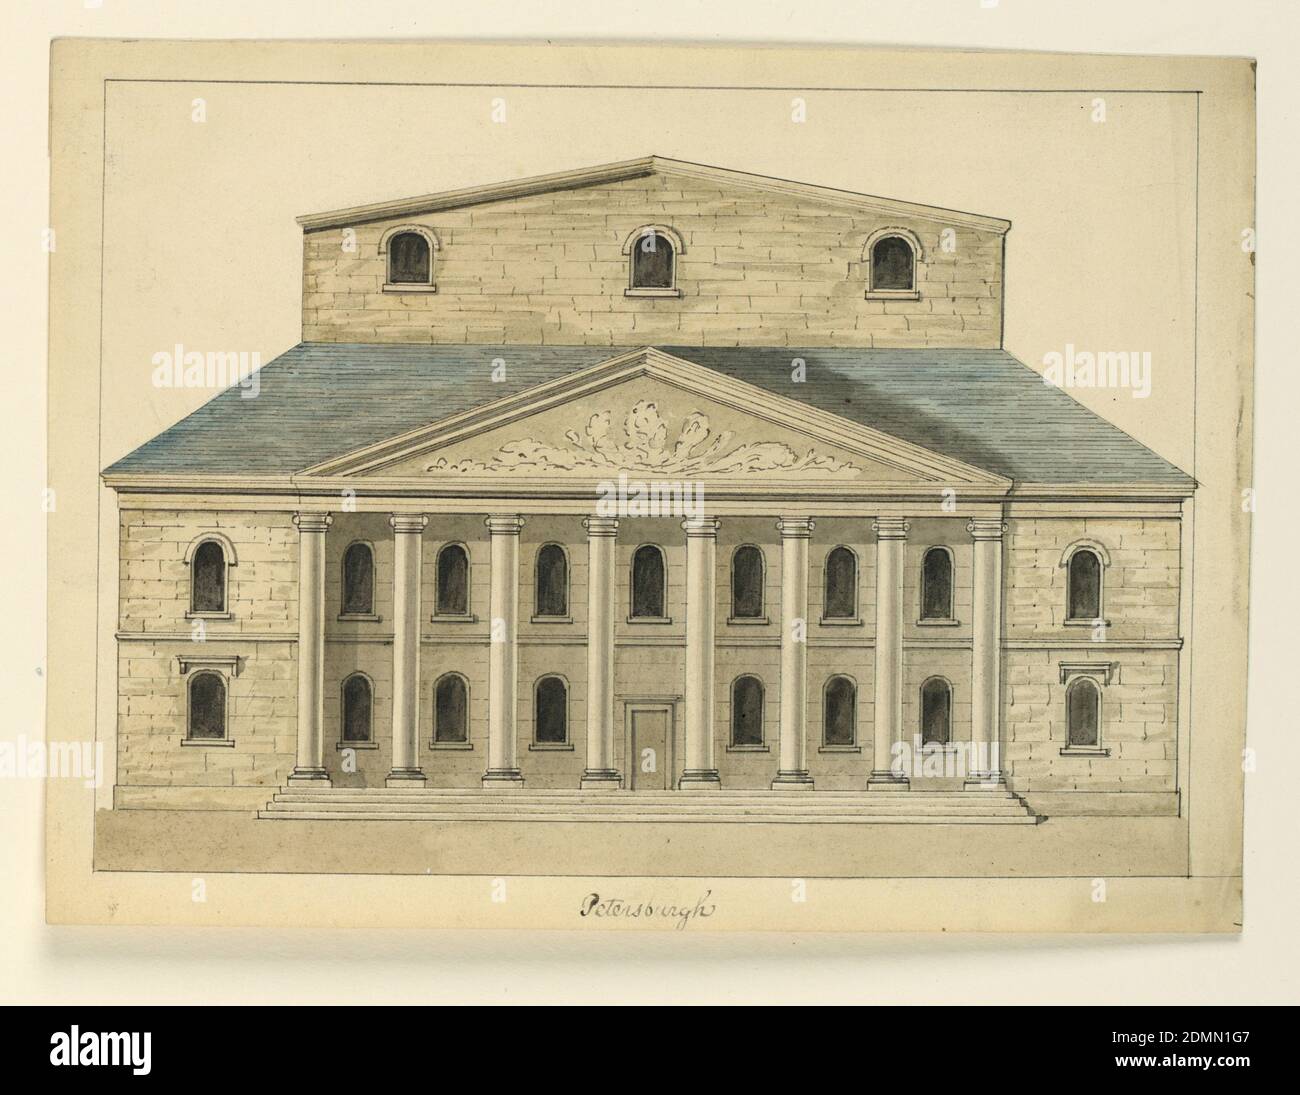 Elevation of the Facade of the Theater, St. Petersburg, Cesare Recanatini, Italian, 1823–1893, Brush and gray, blue watercolor, pen and ink on paper, Horizontal format architectural drawing depicting a two-storied facade, with pedimented portico of eight Ionic columns, and behind a sloping roof, an additional story above the stage. Framing line in pen and ink. Probably designed as an engraving for a book., Italy, ca. 1860, architecture, Drawing Stock Photo